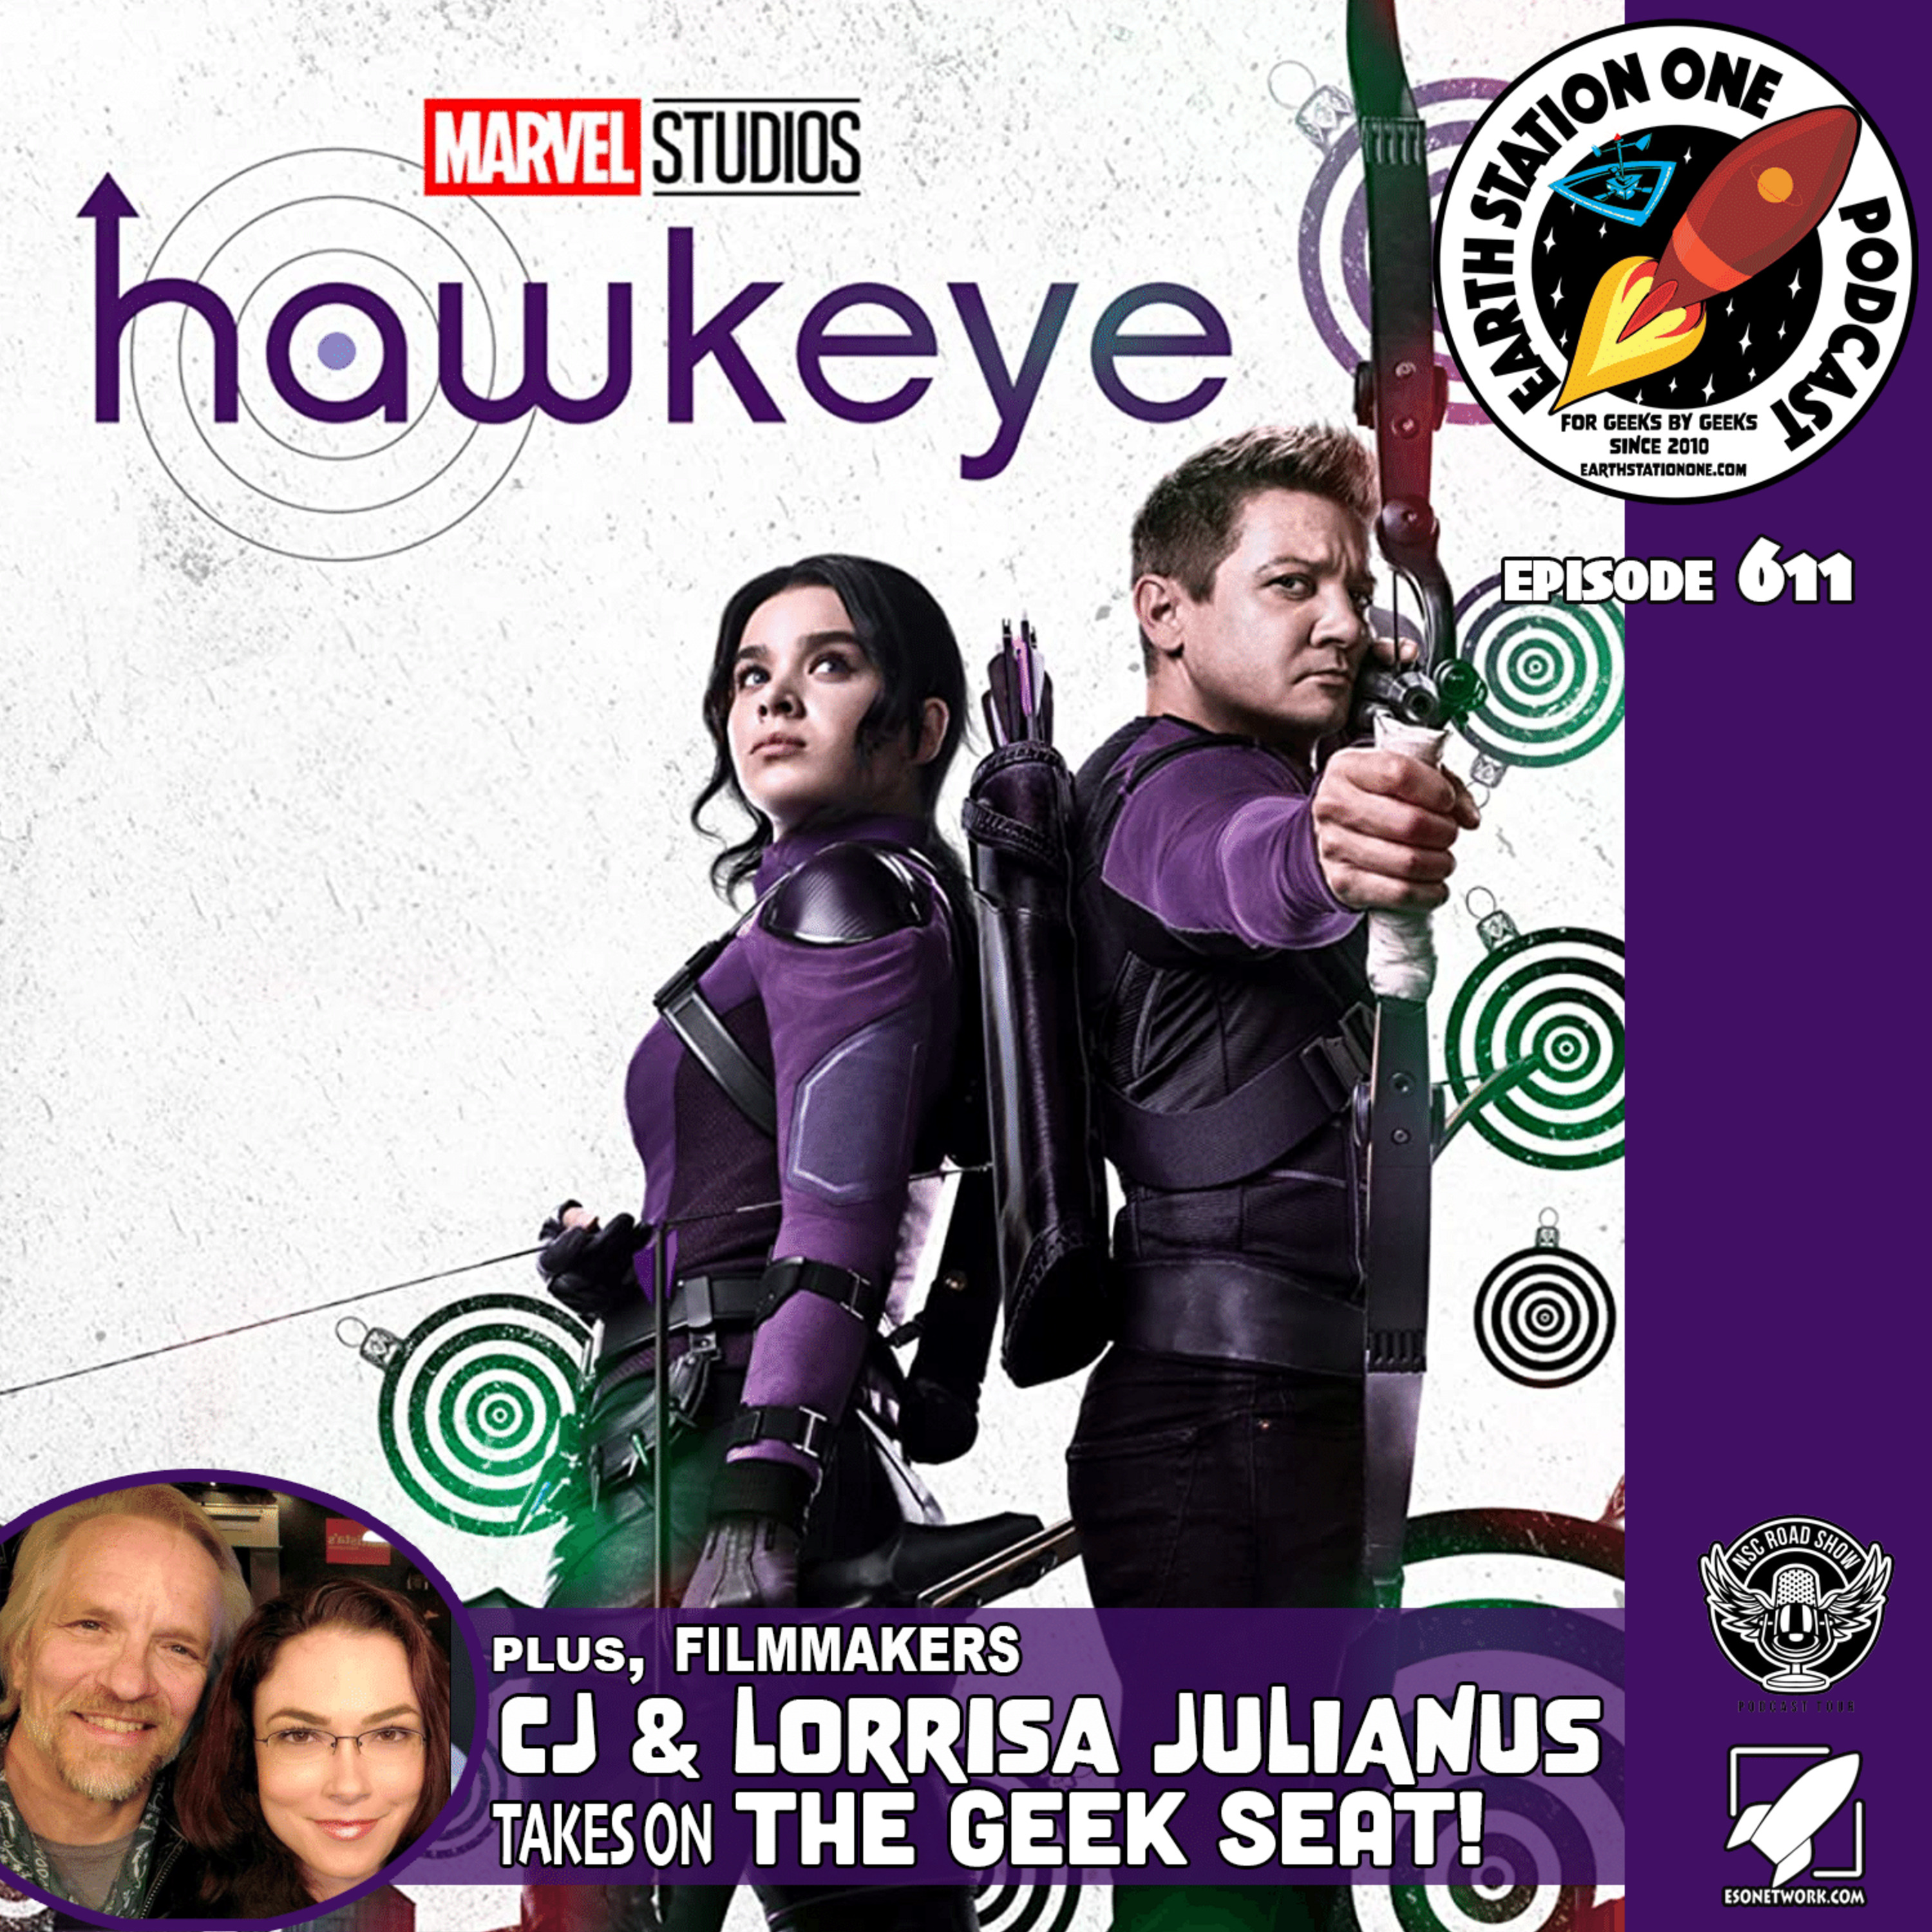 The Earth Station One Podcast - Hawkeye Series Review